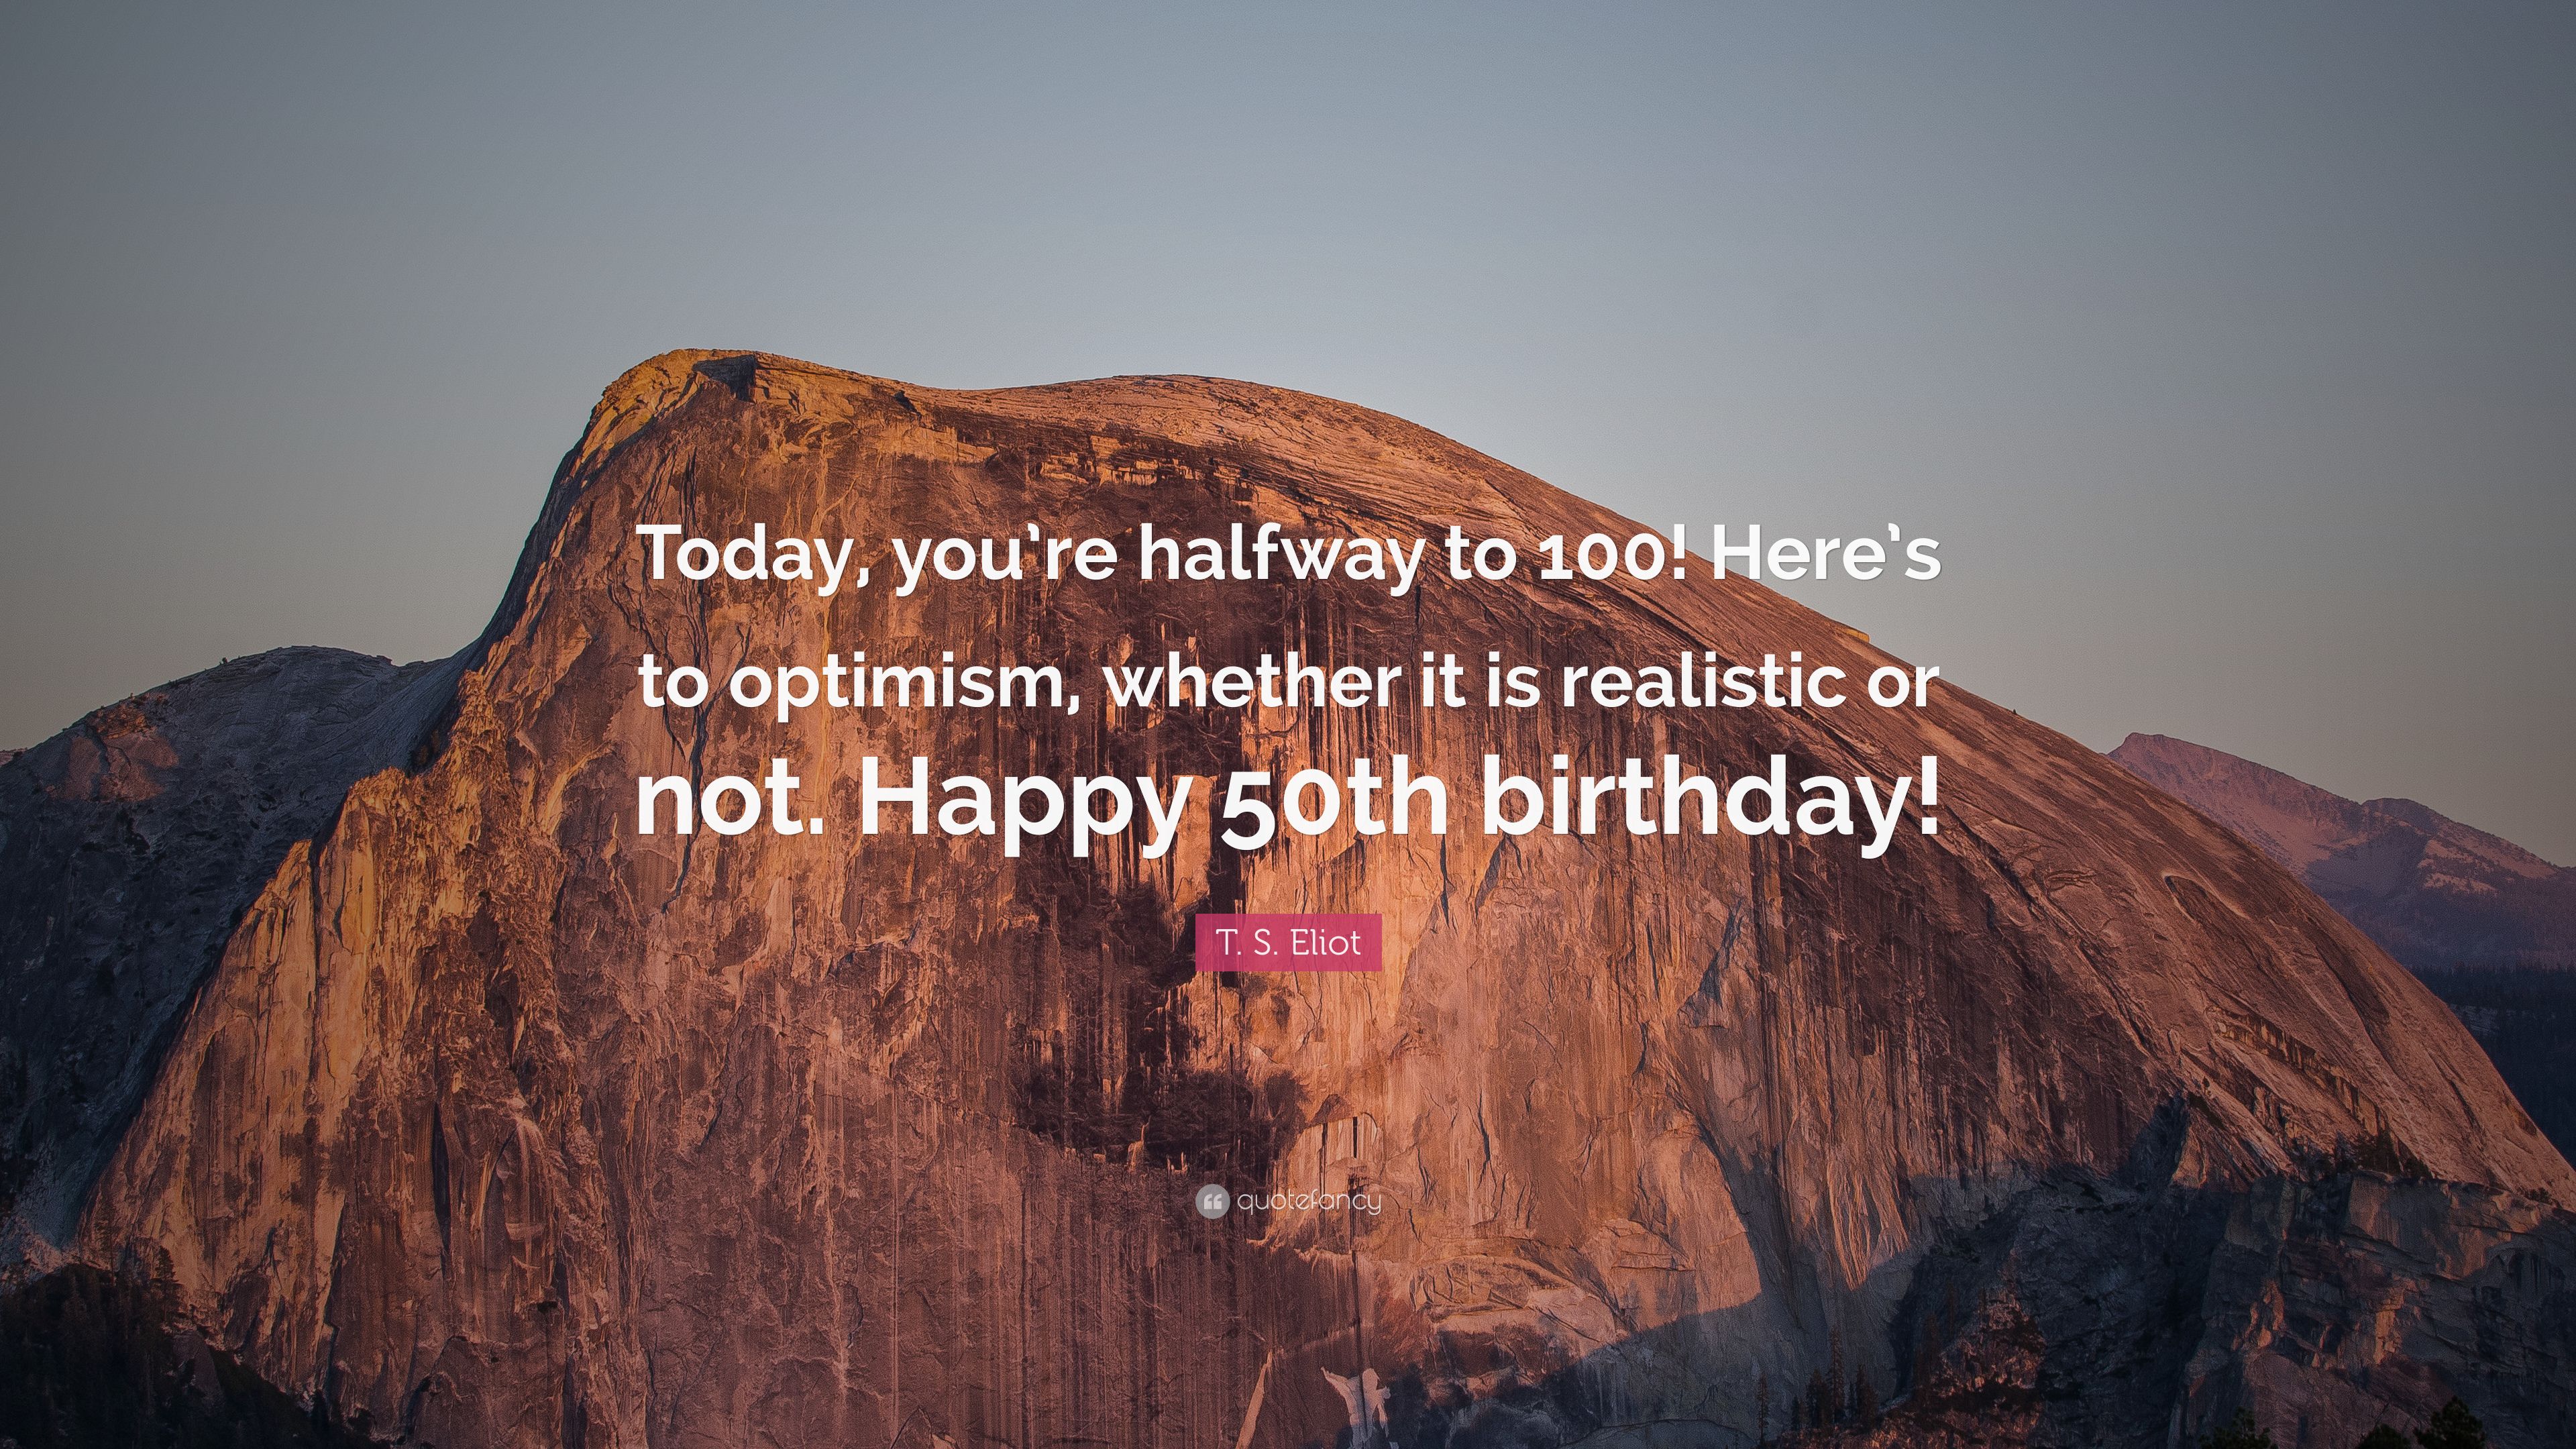 T. S. Eliot Quote: “Today, you're halfway to 100! Here's to optimism, whether it is realistic or not. Happy 50th birthday!” (7 wallpaper)